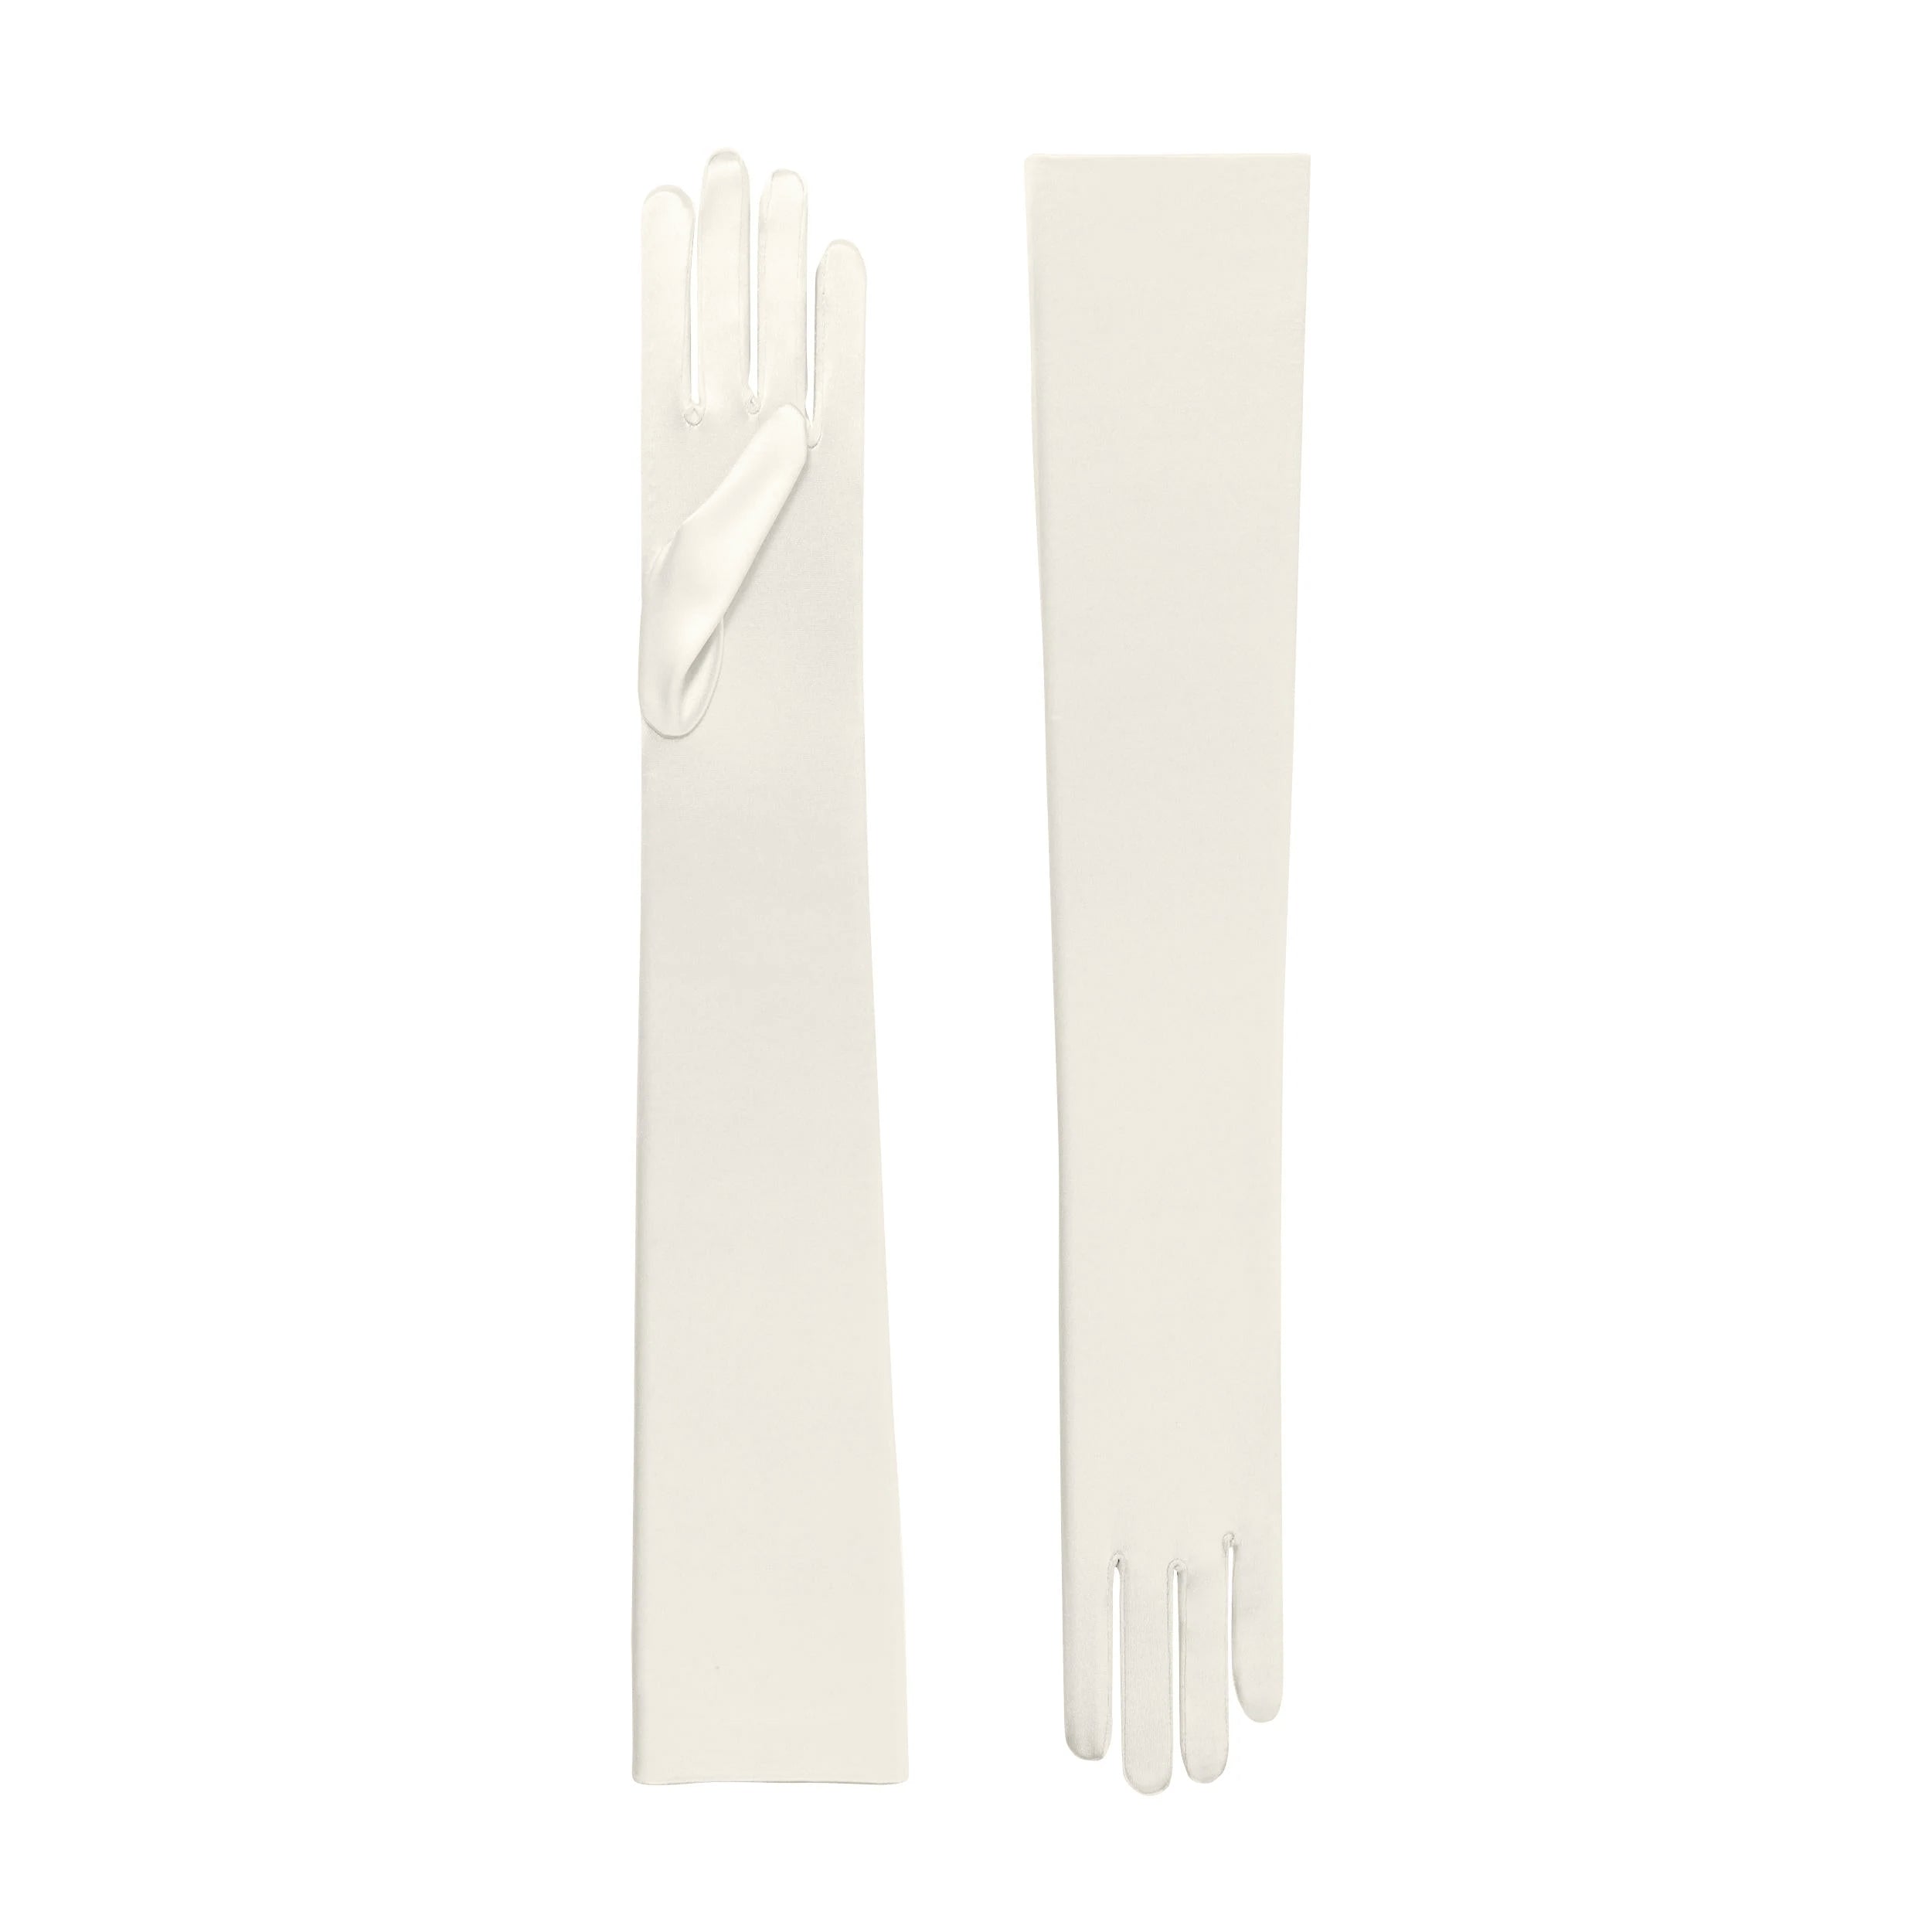 Cornelia James - Ivory Satin Opera Gloves - Hermione - Size Large (8½) - Made to Measure Evening Gloves by Cornelia James product